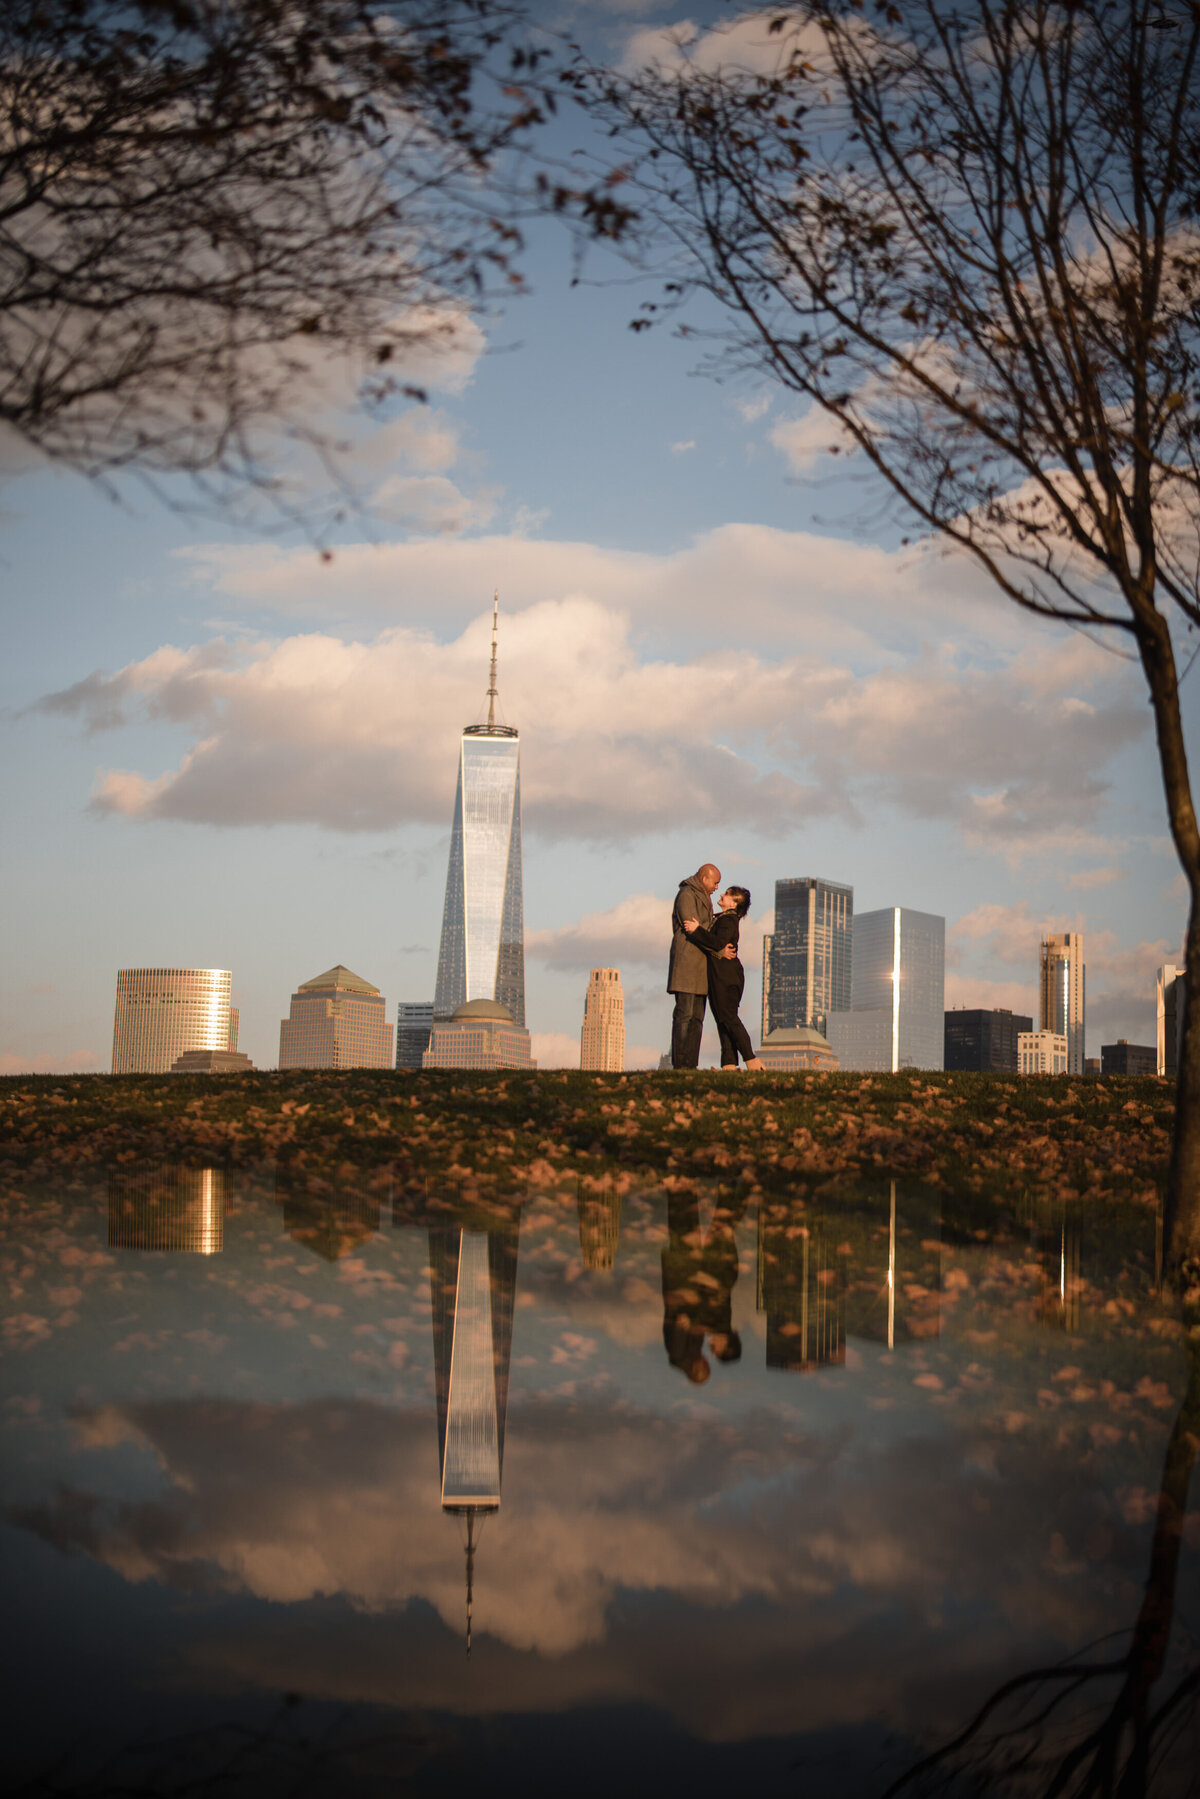 A man and woman standing at the edge of a park with a view of the New York skyline.